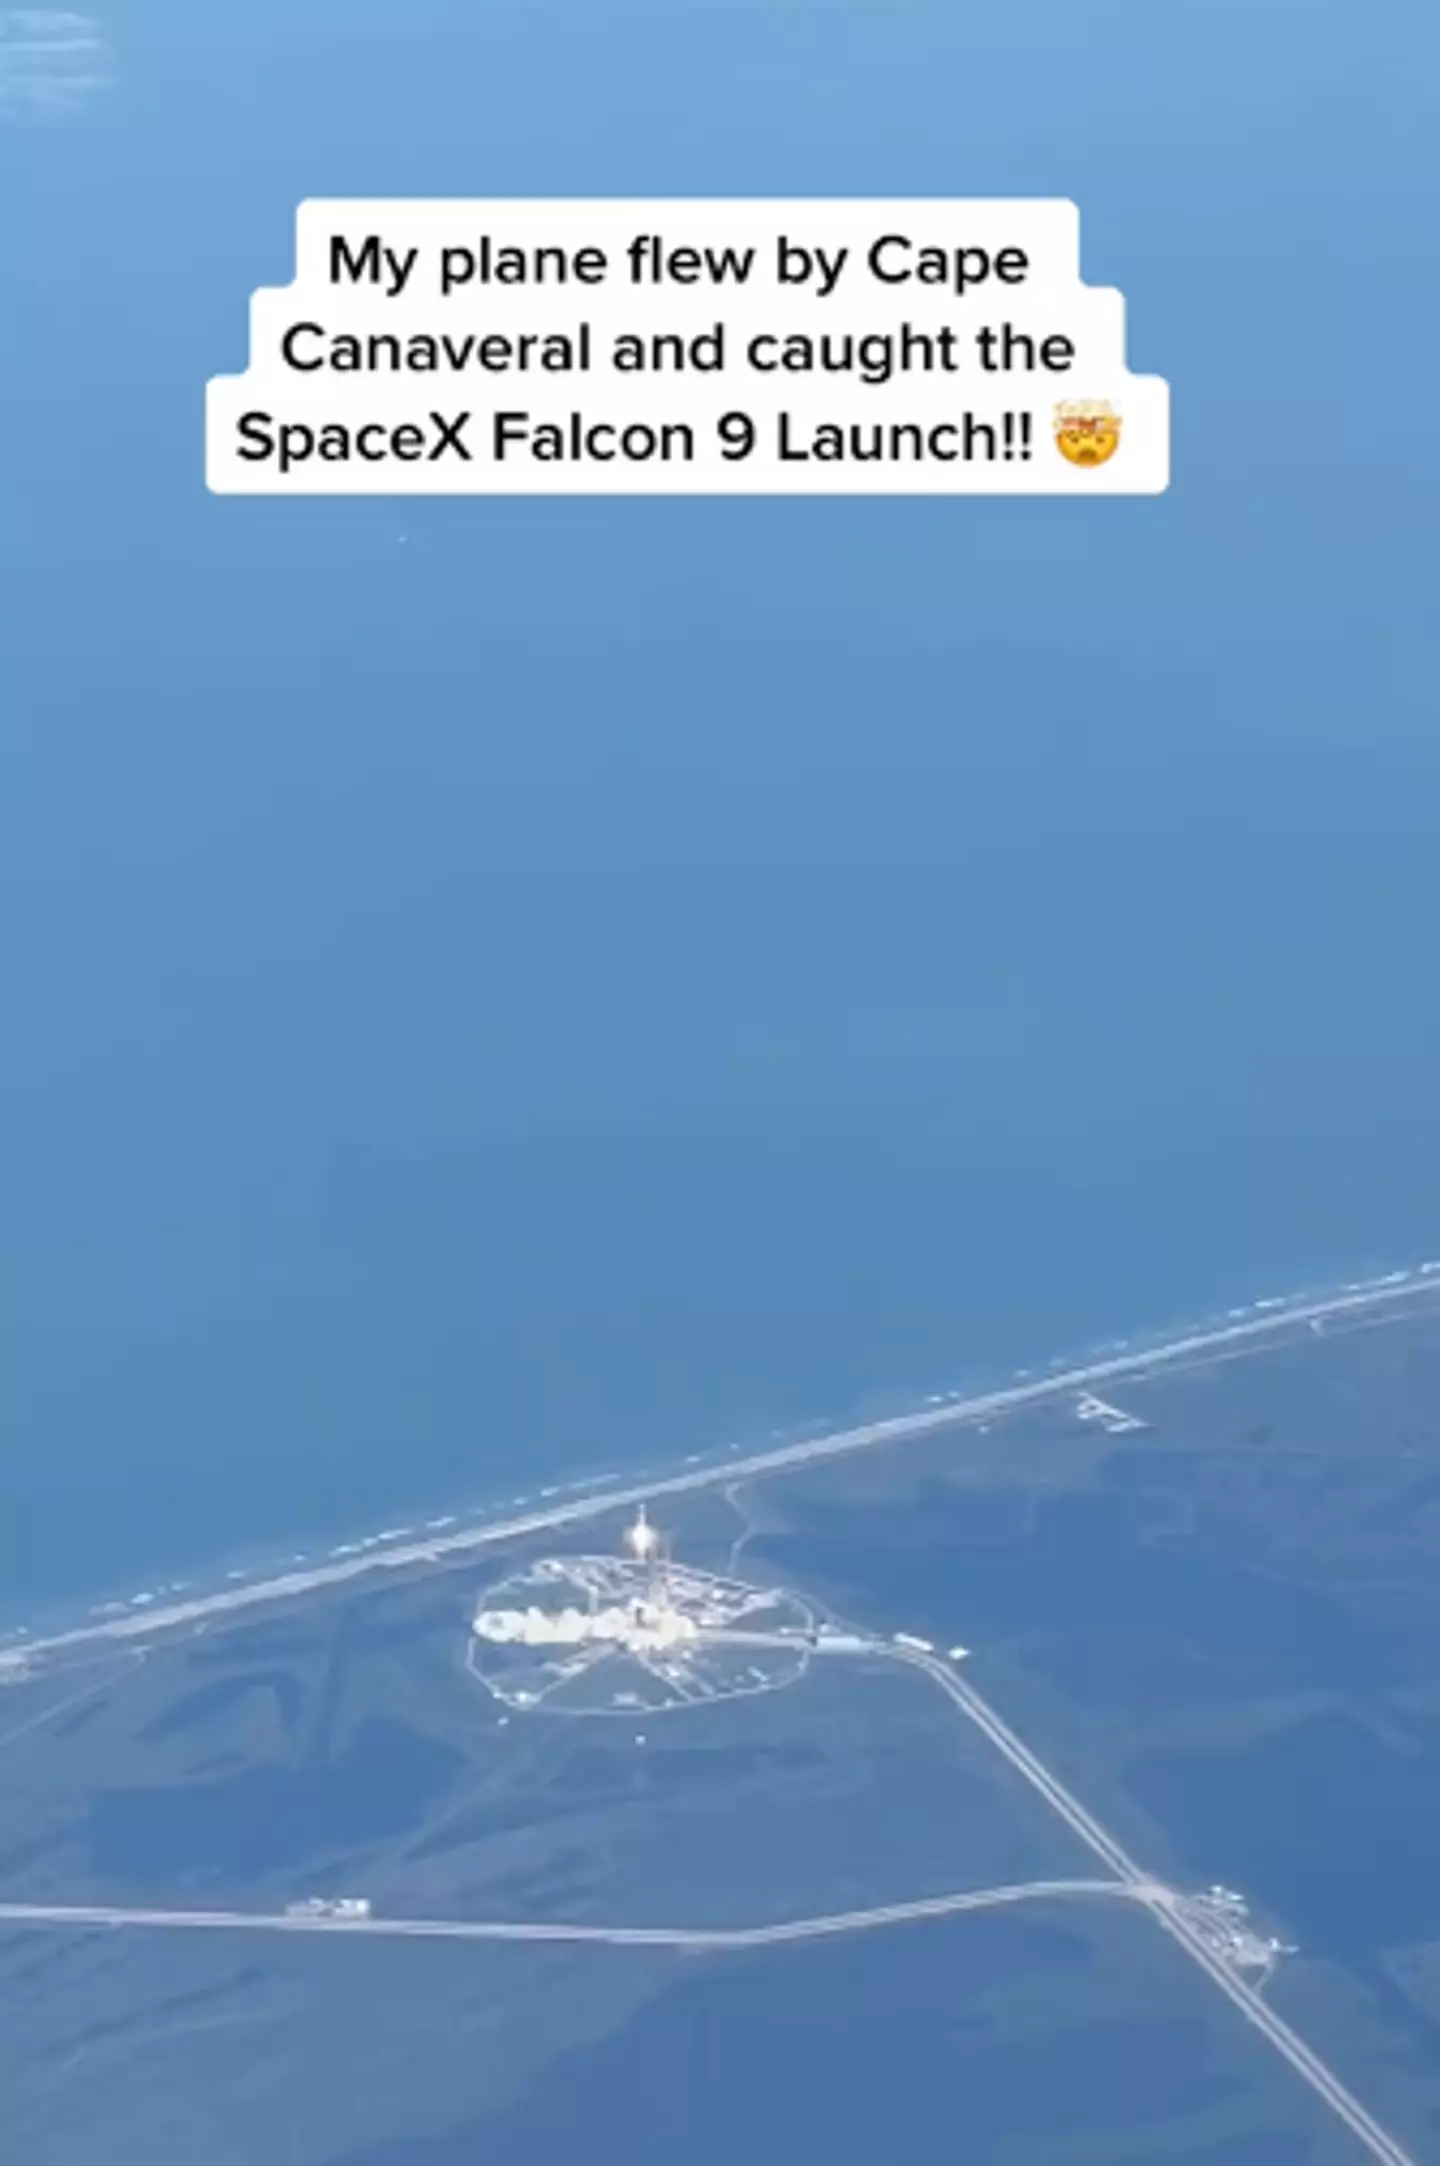 The cabin crew member captured amazing footage of a SpaceX launch.